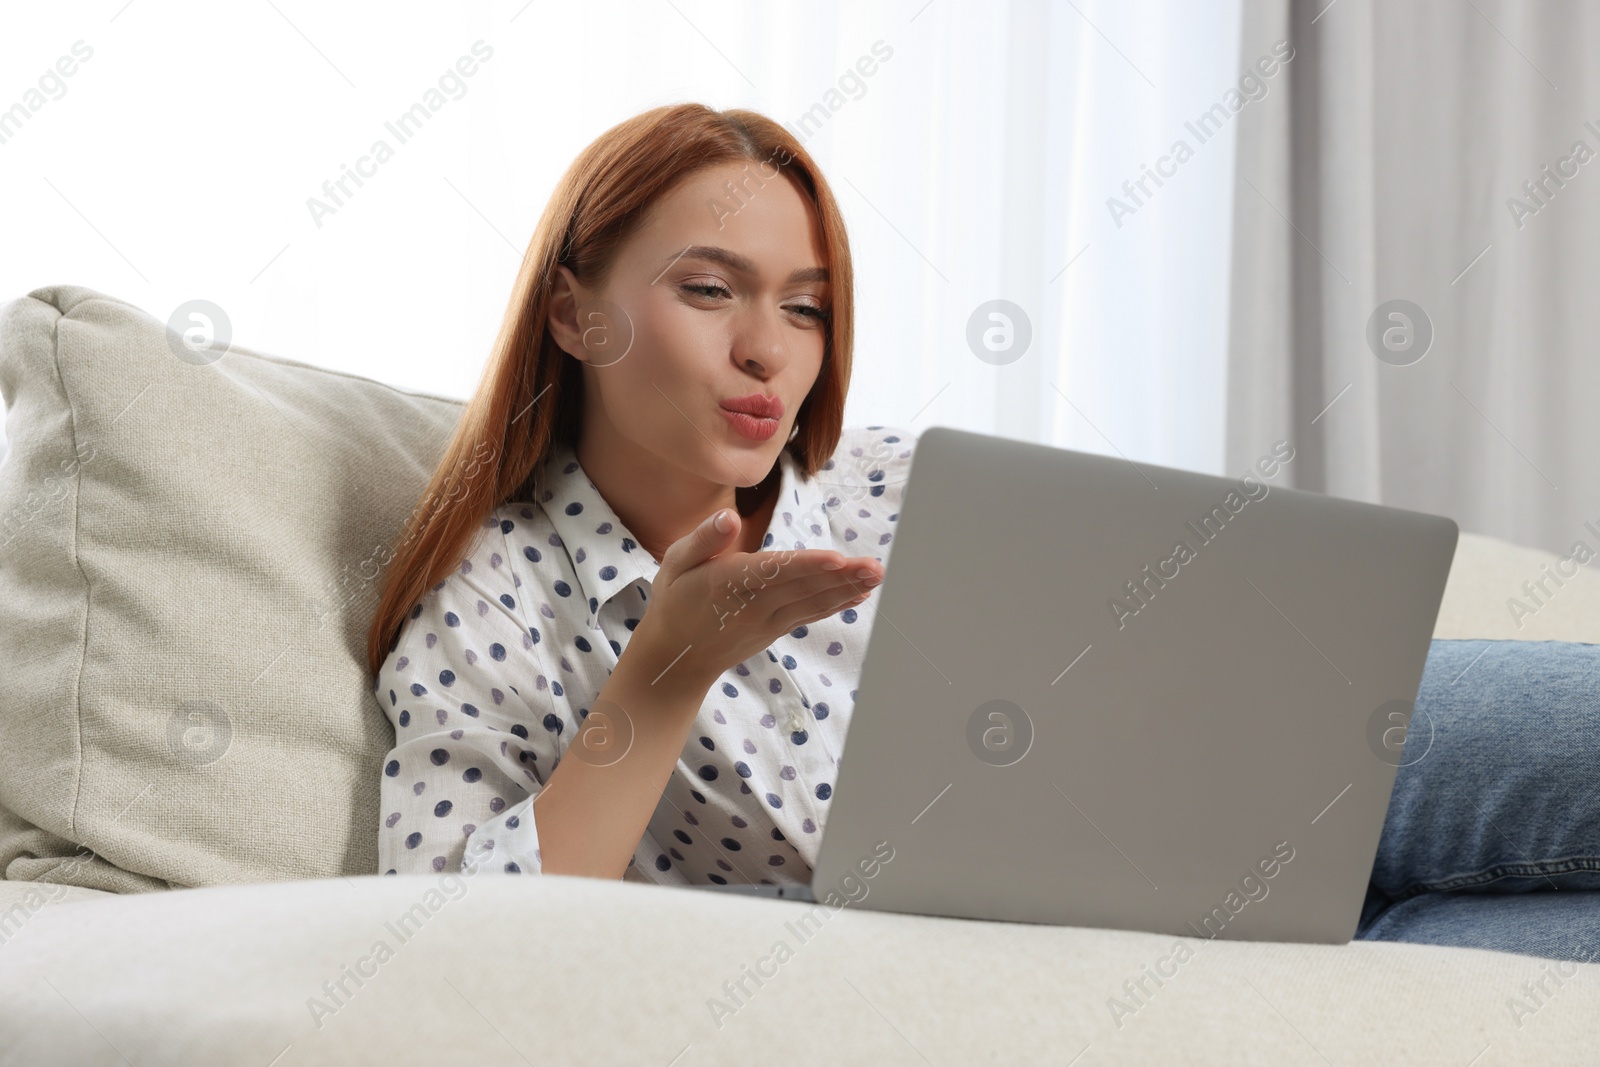 Photo of Woman blowing kiss during video chat via laptop at home. Long-distance relationship